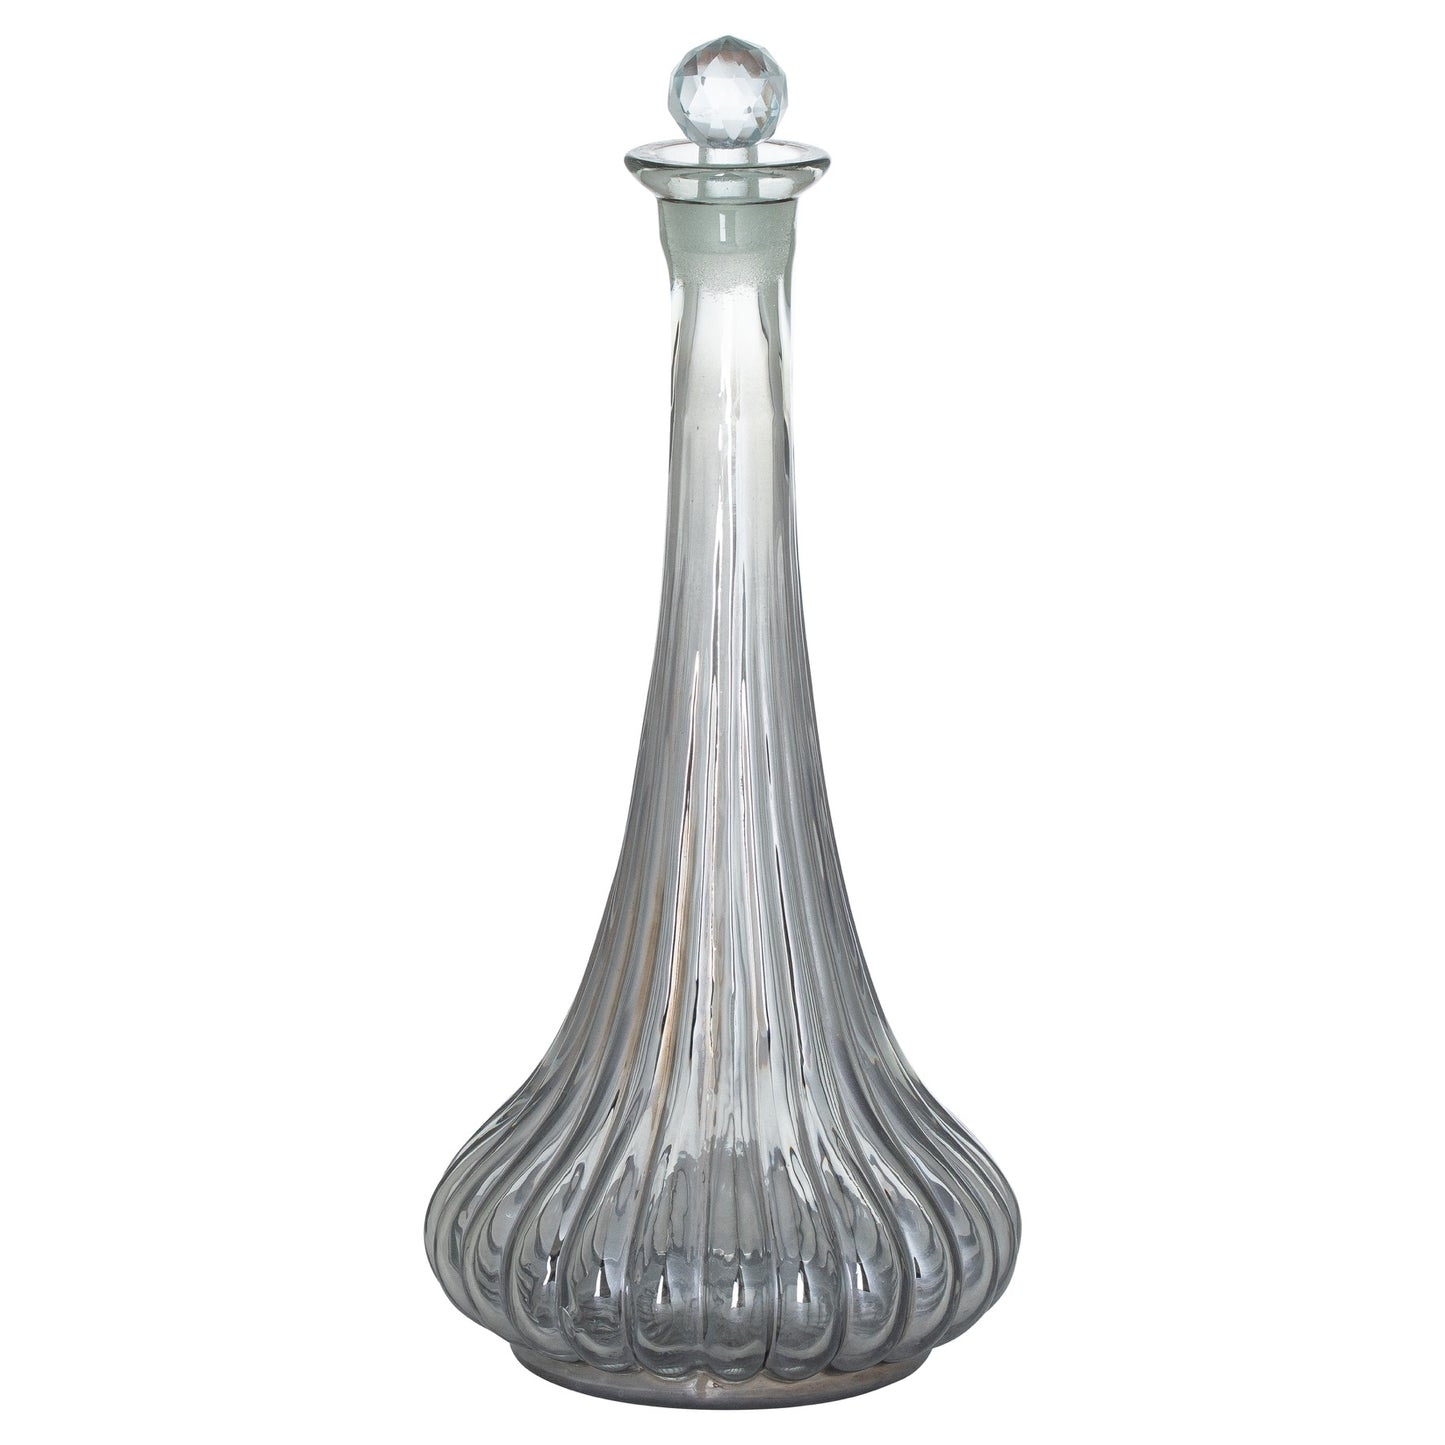 The Noel Collection Smoked Midnight Elle Decorative Decanter